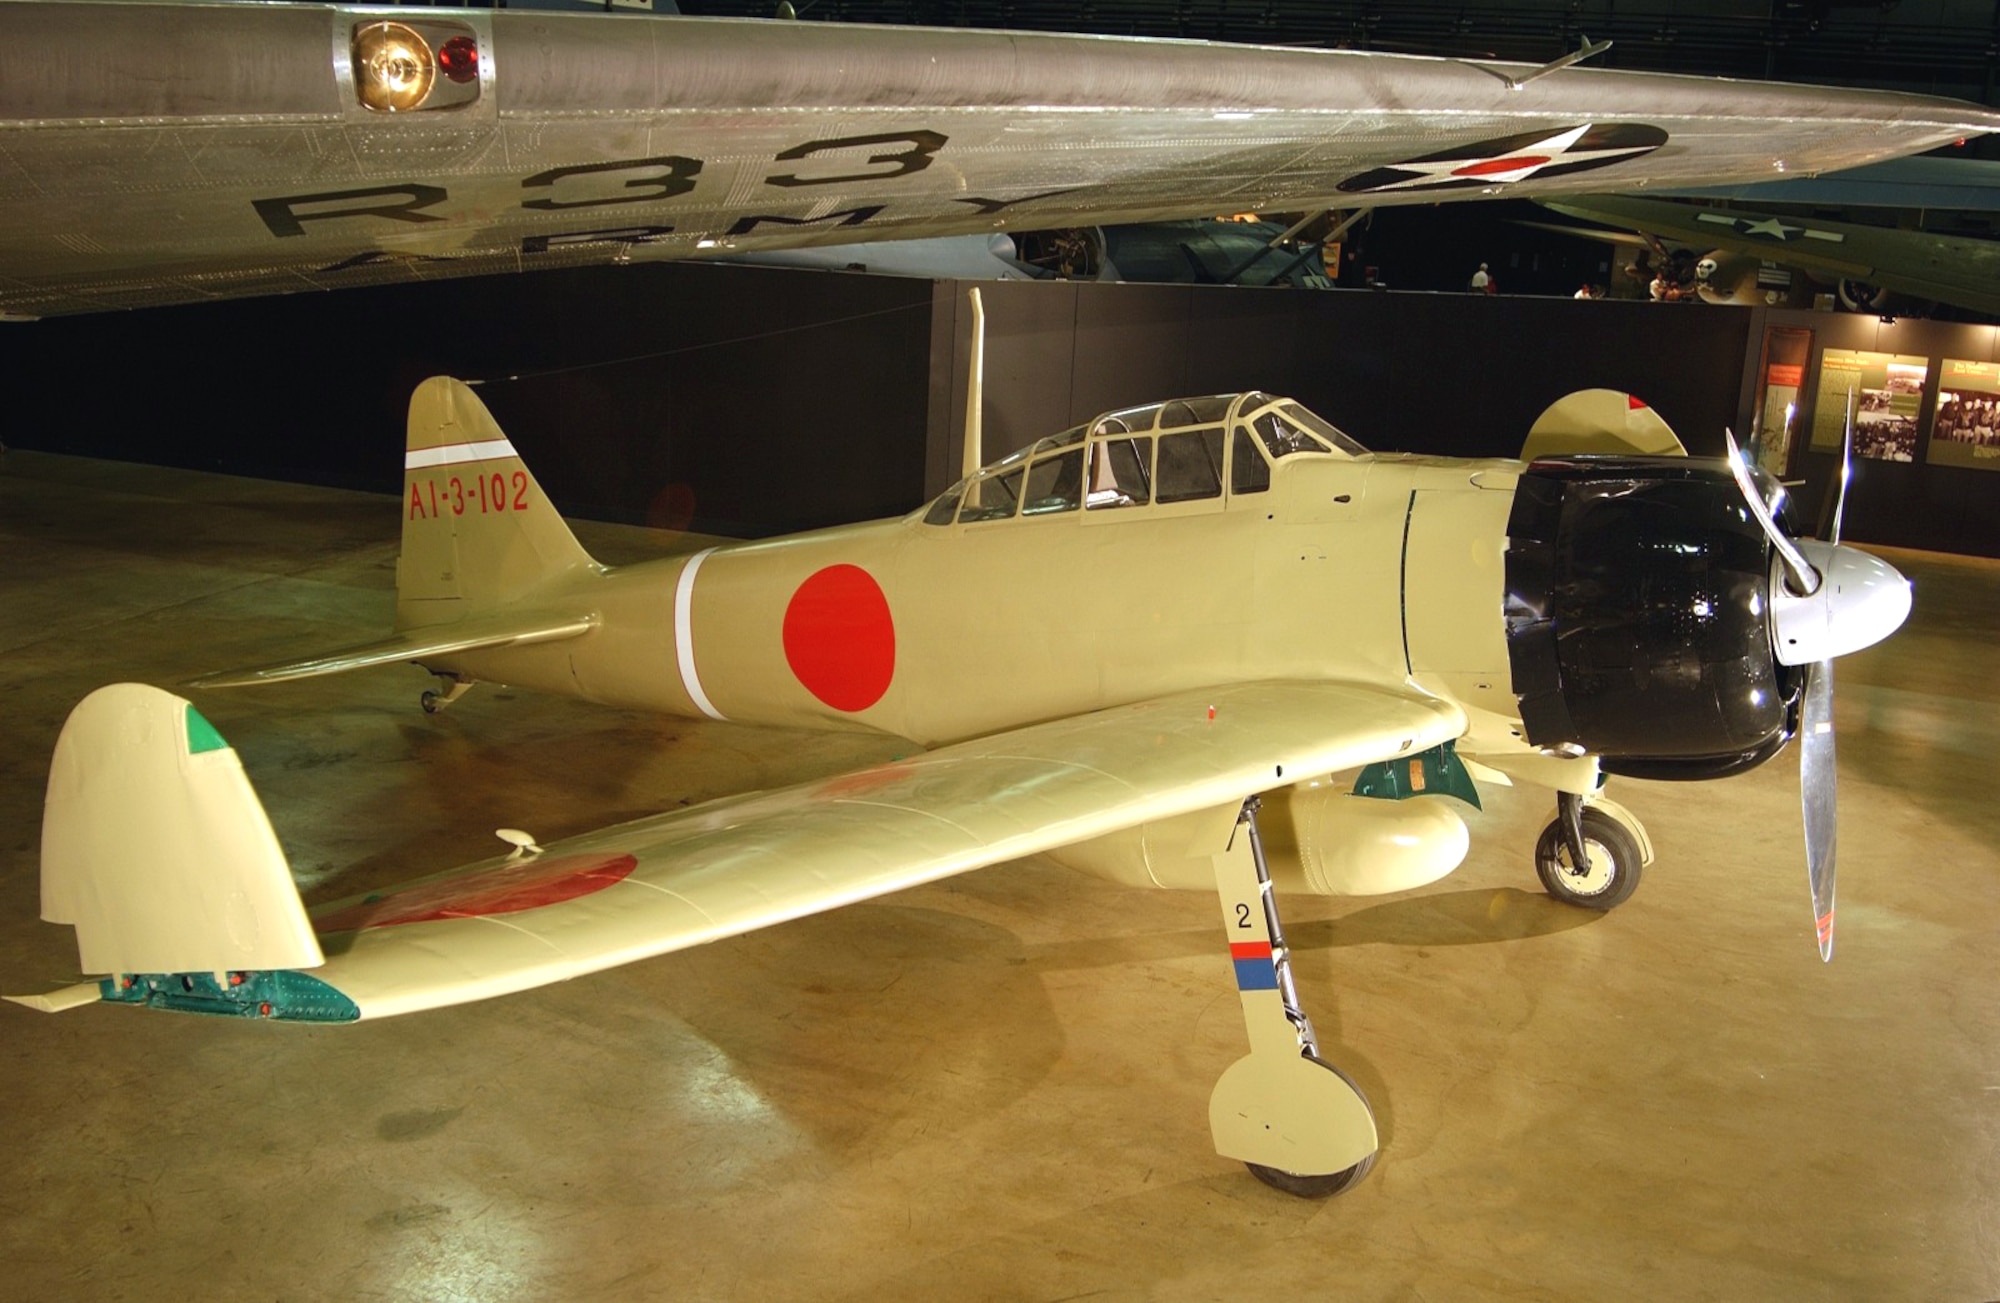 DAYTON, Ohio -- The U.S. Air Force Museum's Japanese Zero is on display under the wing of the B-18A in the museum's Air Power Gallery.  The gallery chronicles the history of the U.S. Army Air Forces in World War II.  (Courtesy photo)